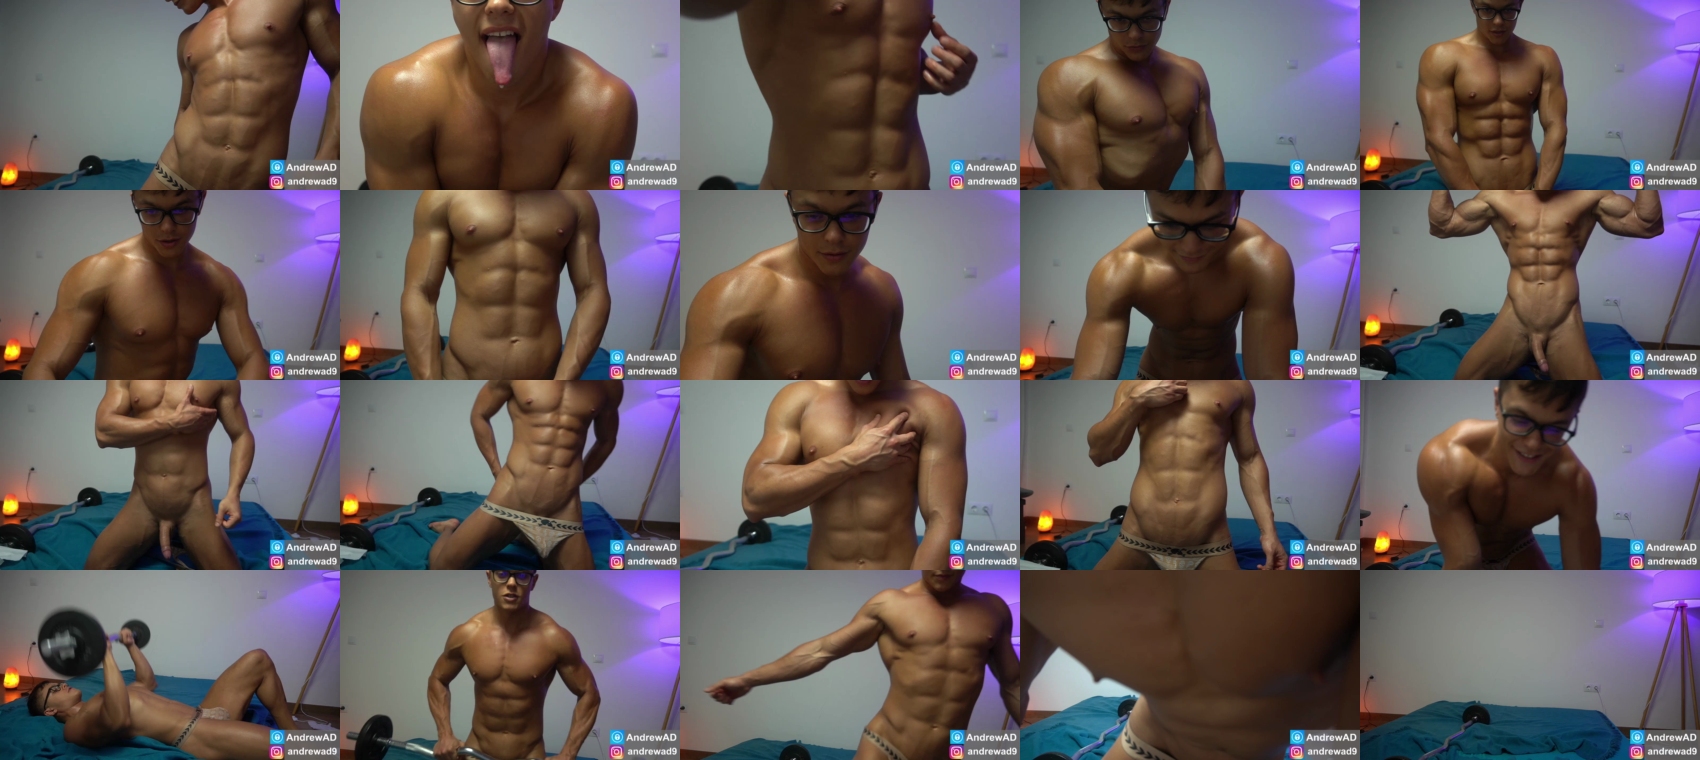 andrewd9  25-06-2022 Males nude